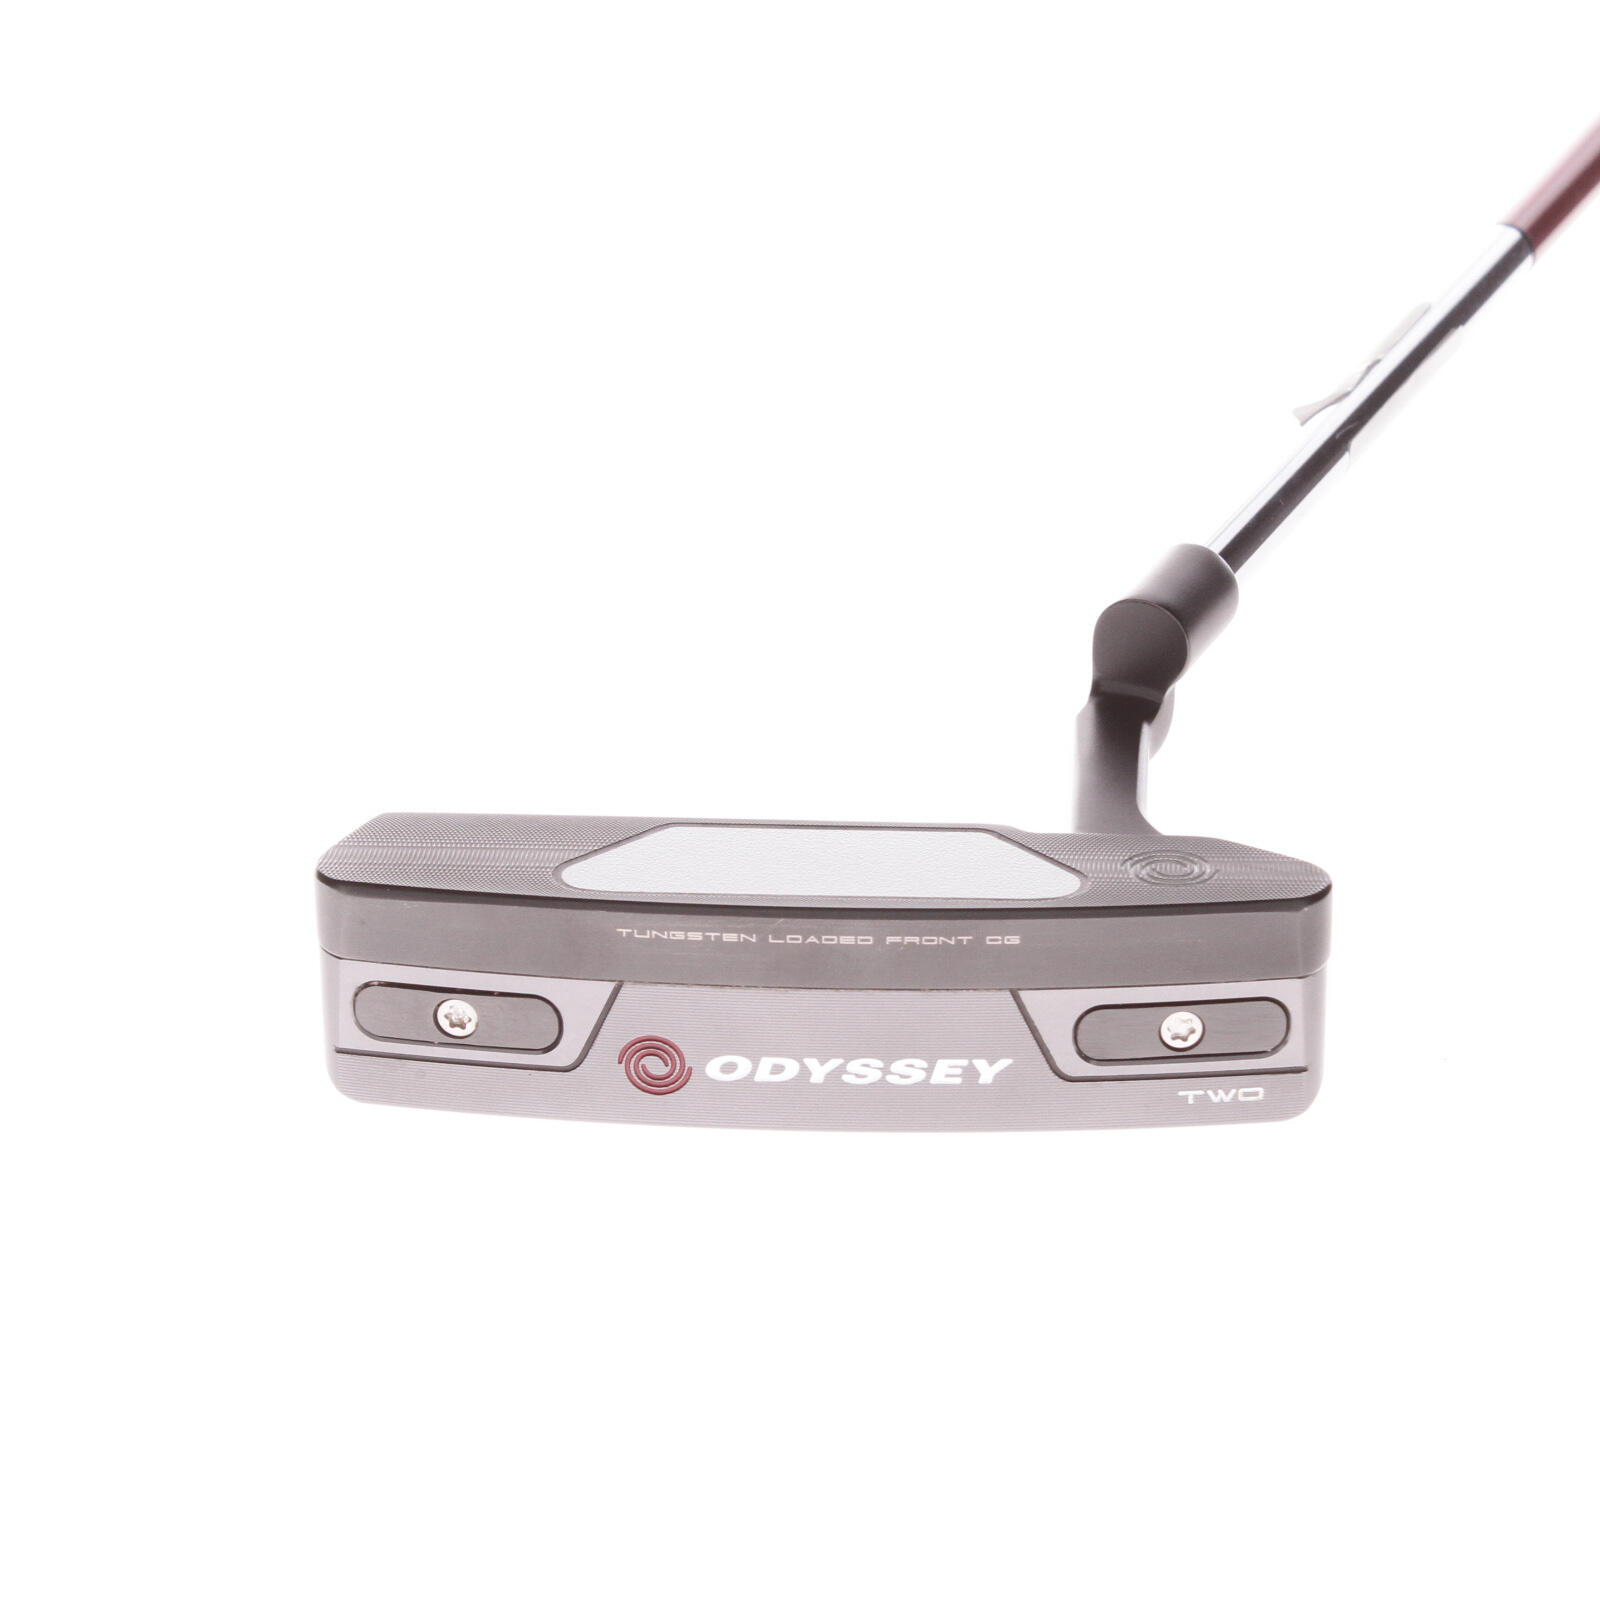 USED - Odyssey Tri-Hot 5K Two Putter 31.5 Inches Length Graphite Shaft - GRADE B 2/7